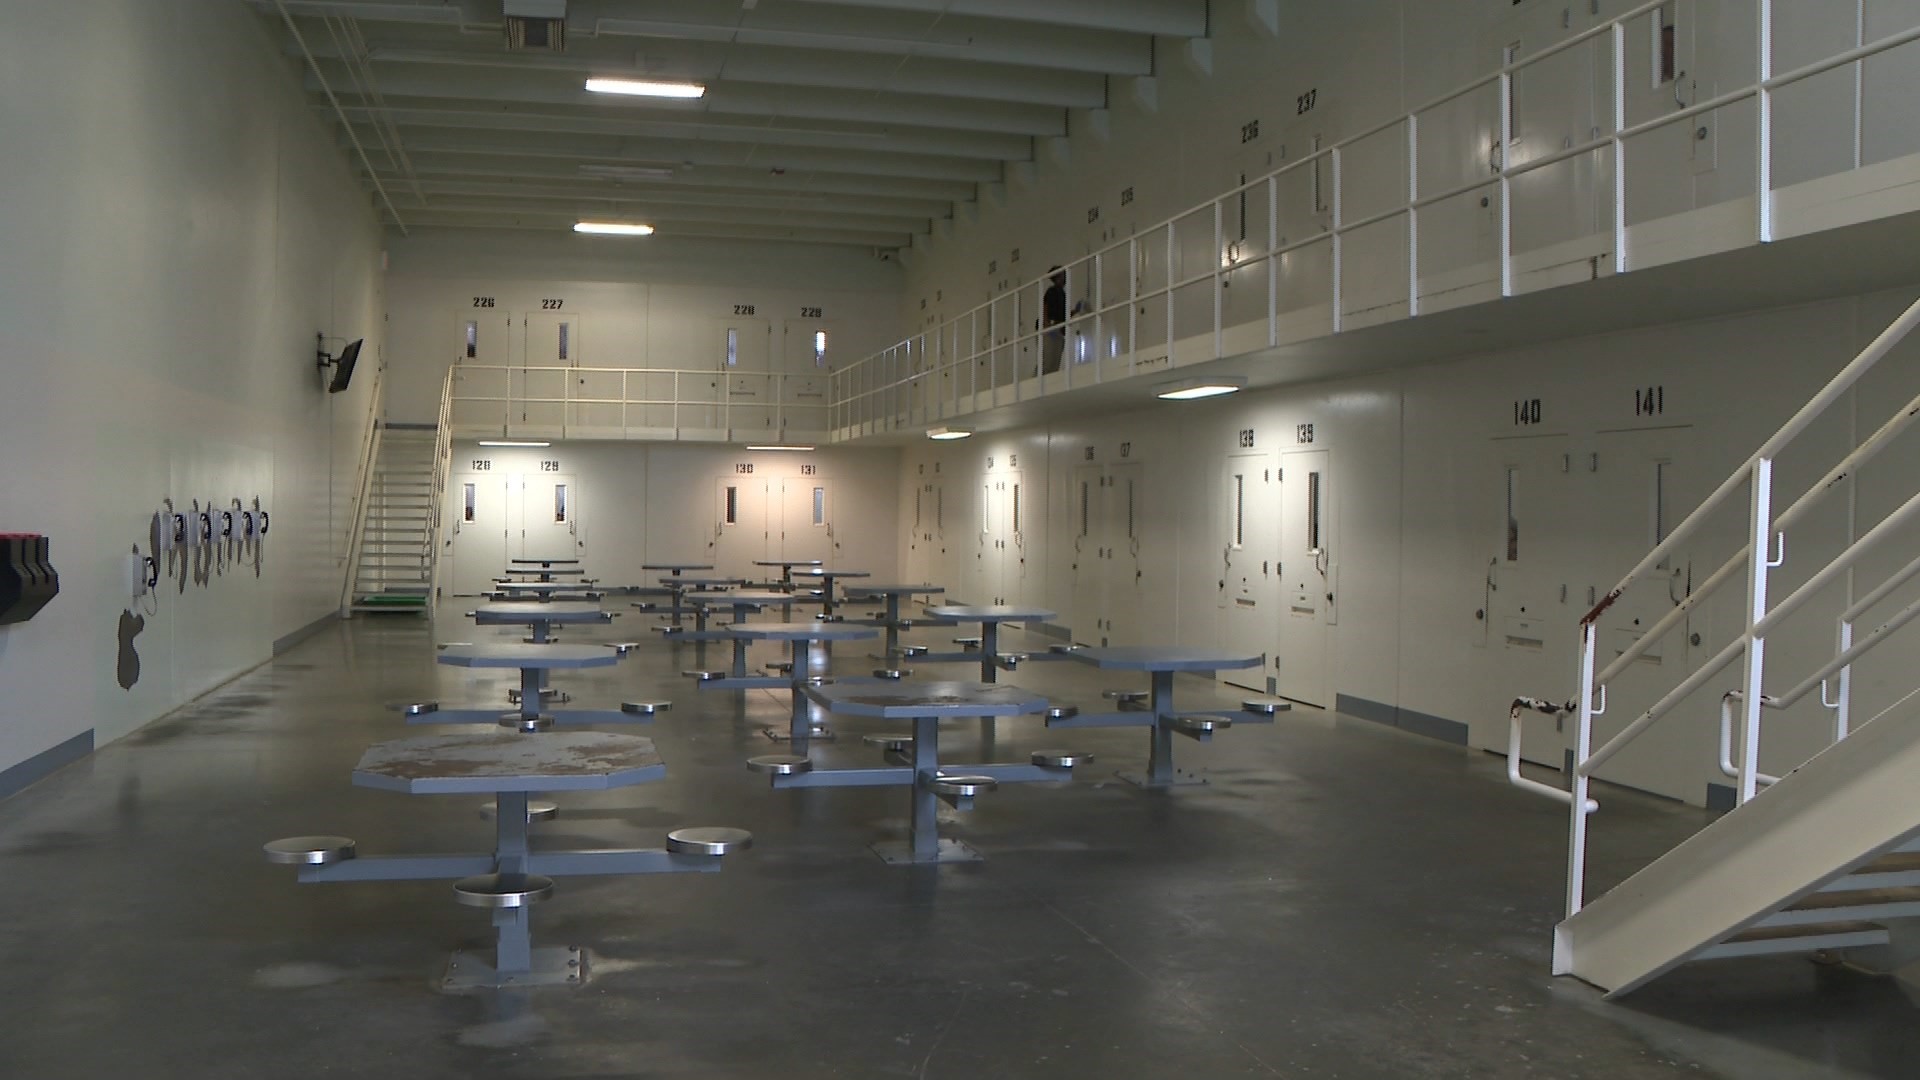 Woman held at Henry County Jail shares her experiences inside | 13wmaz.com